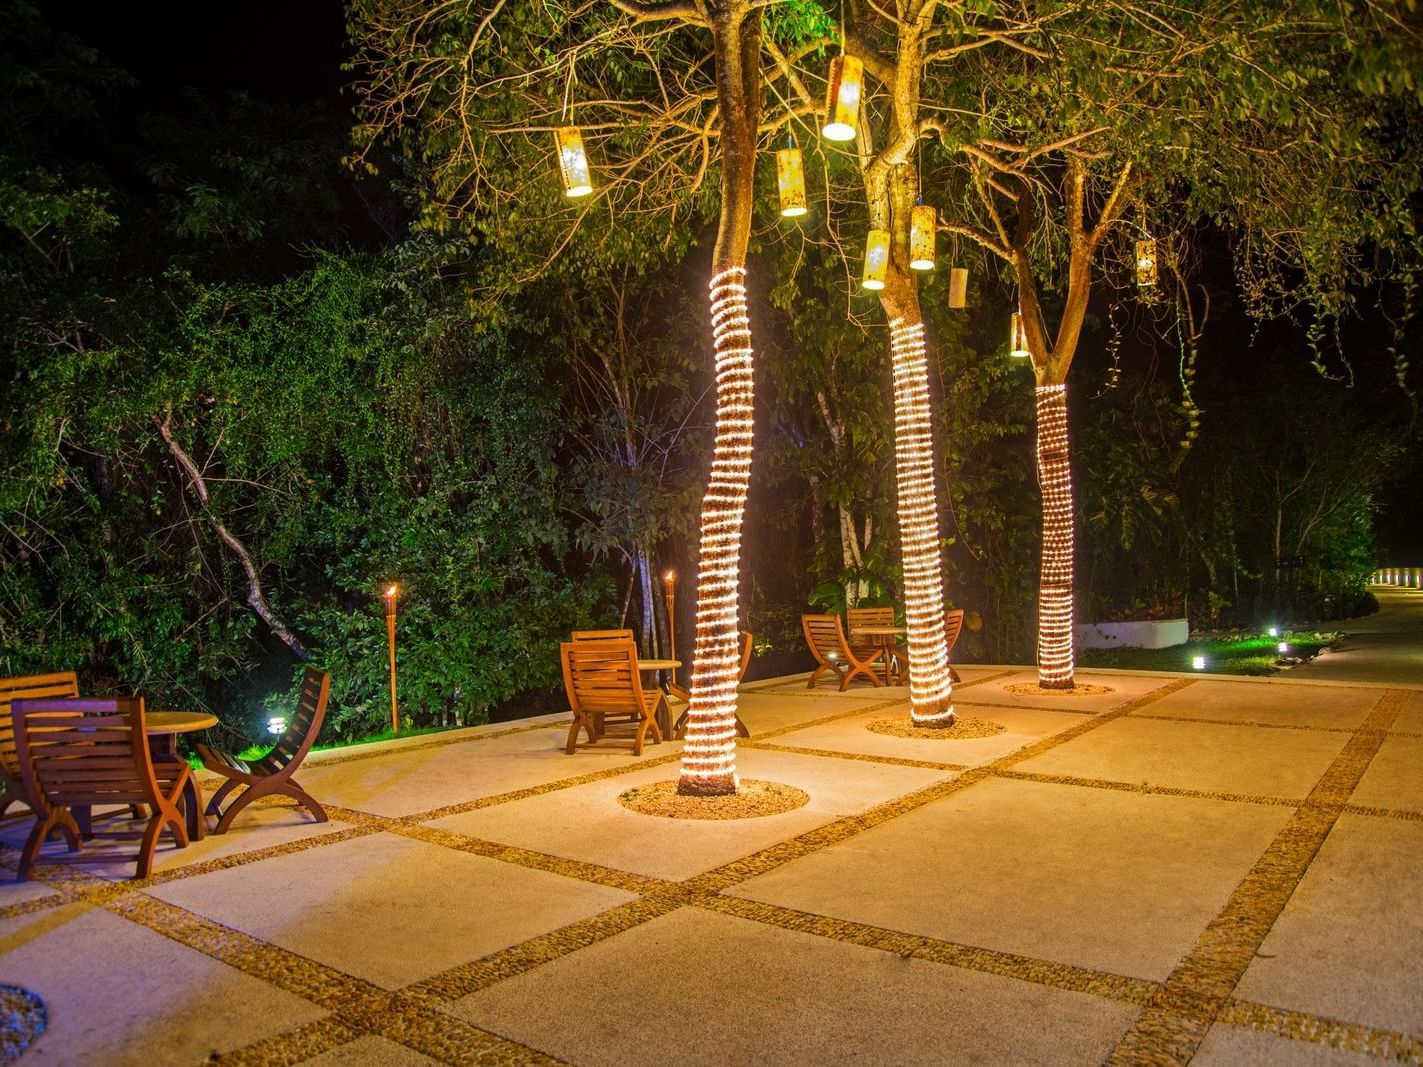 Trees decorated with lights at night at La Coleccion Resorts